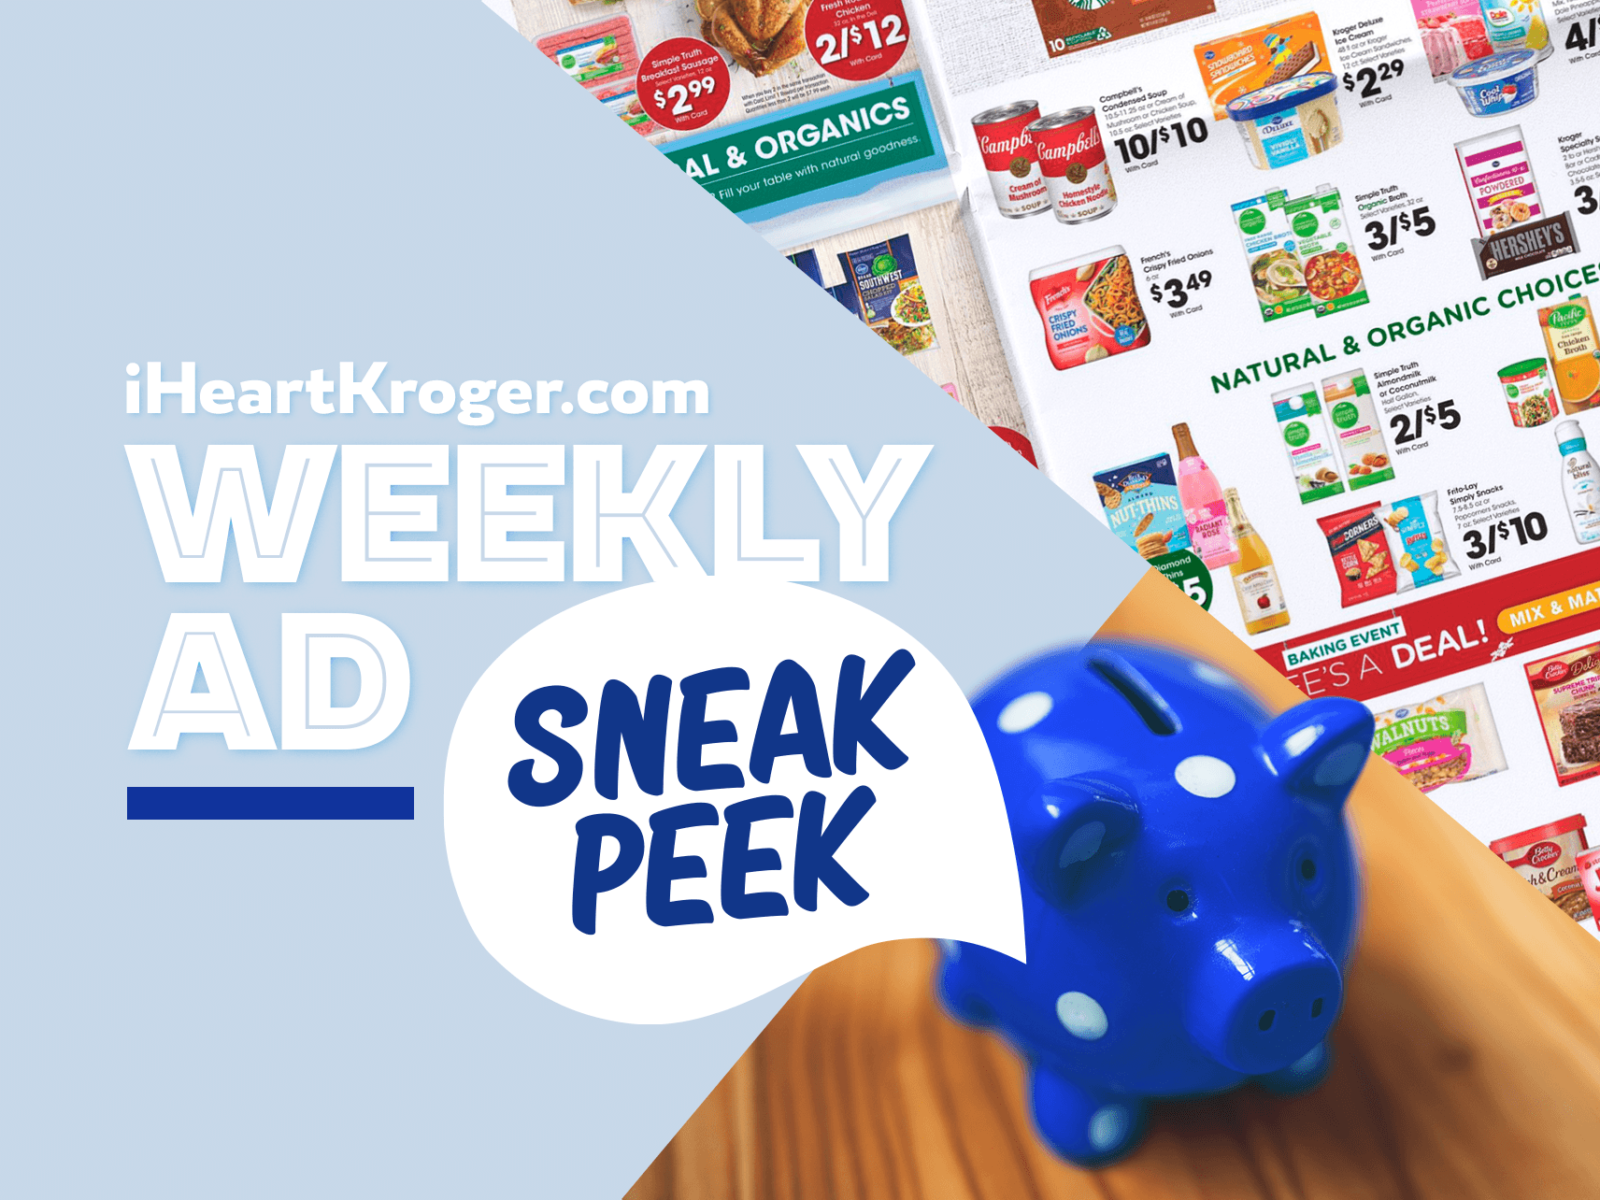 Kroger Ad & Coupons Week Of 6/22 to 6/28